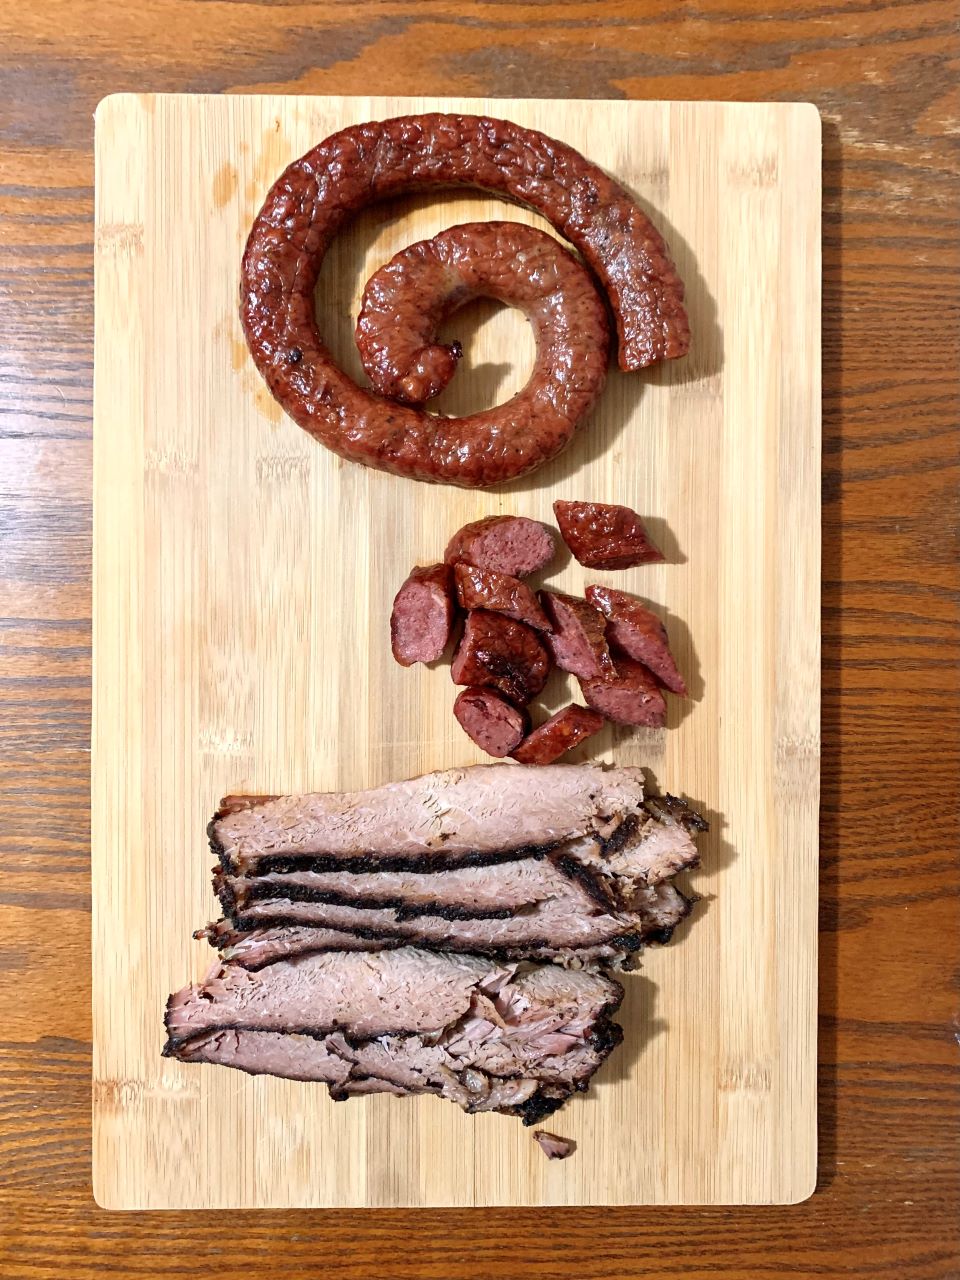 Our Smoked Meat Tray